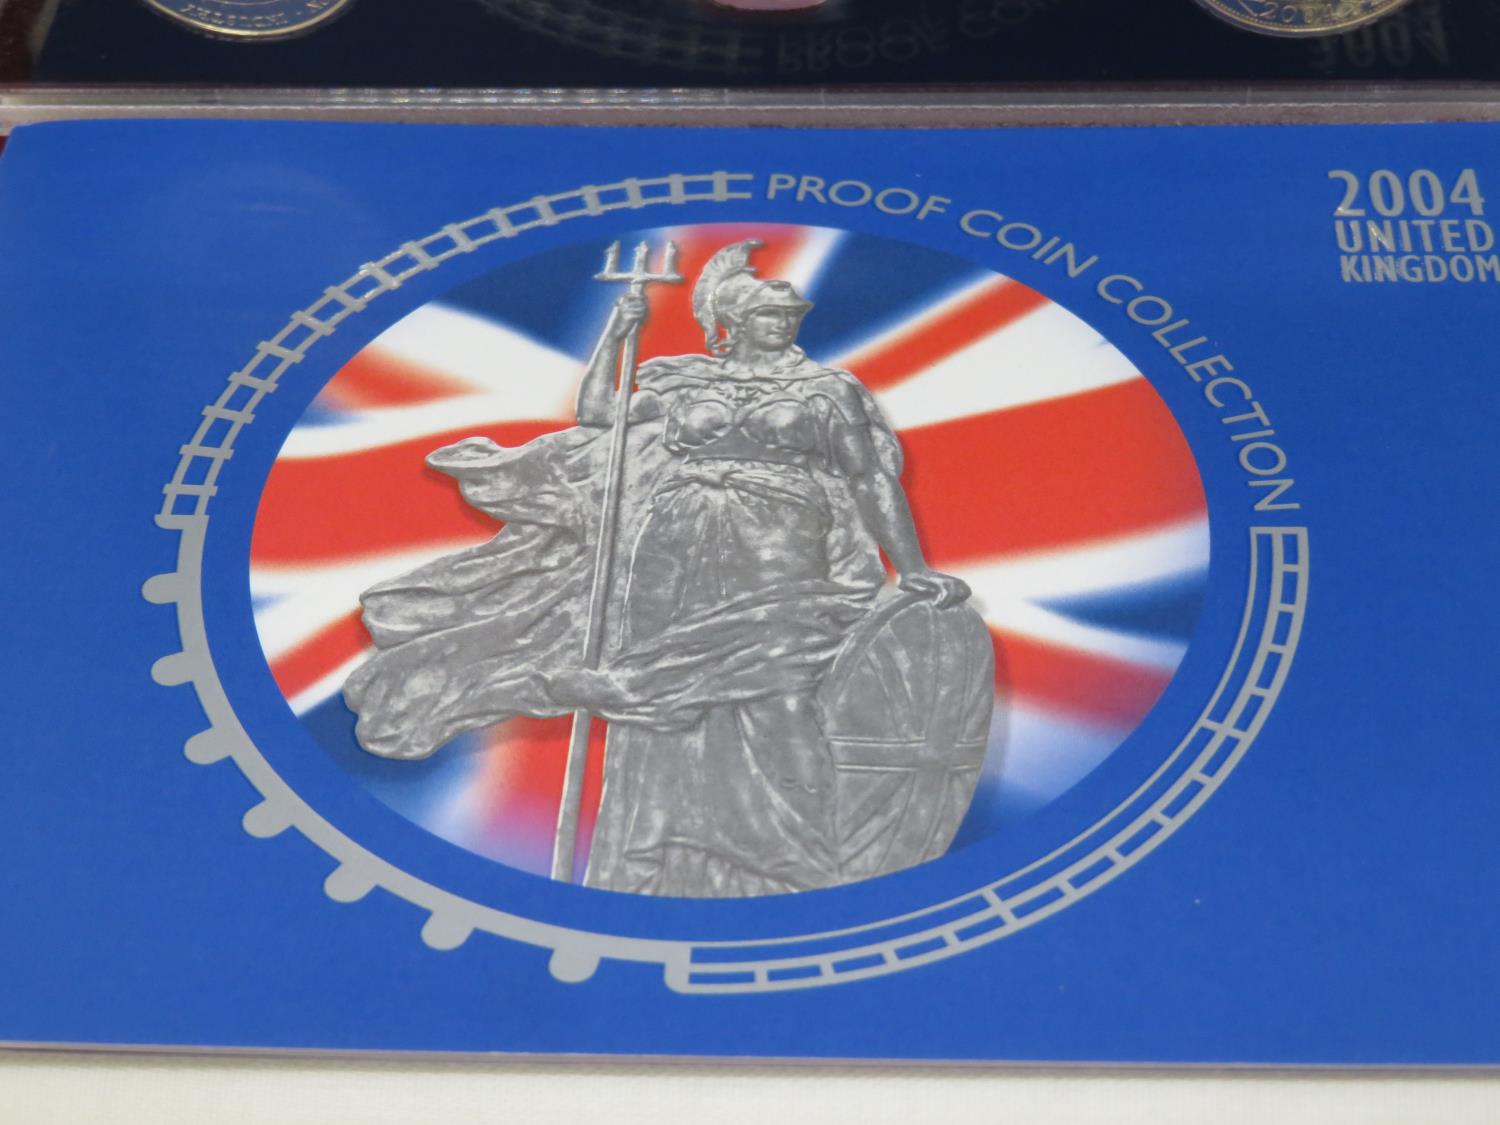 2004 UK Deluxe coin set - Image 2 of 3